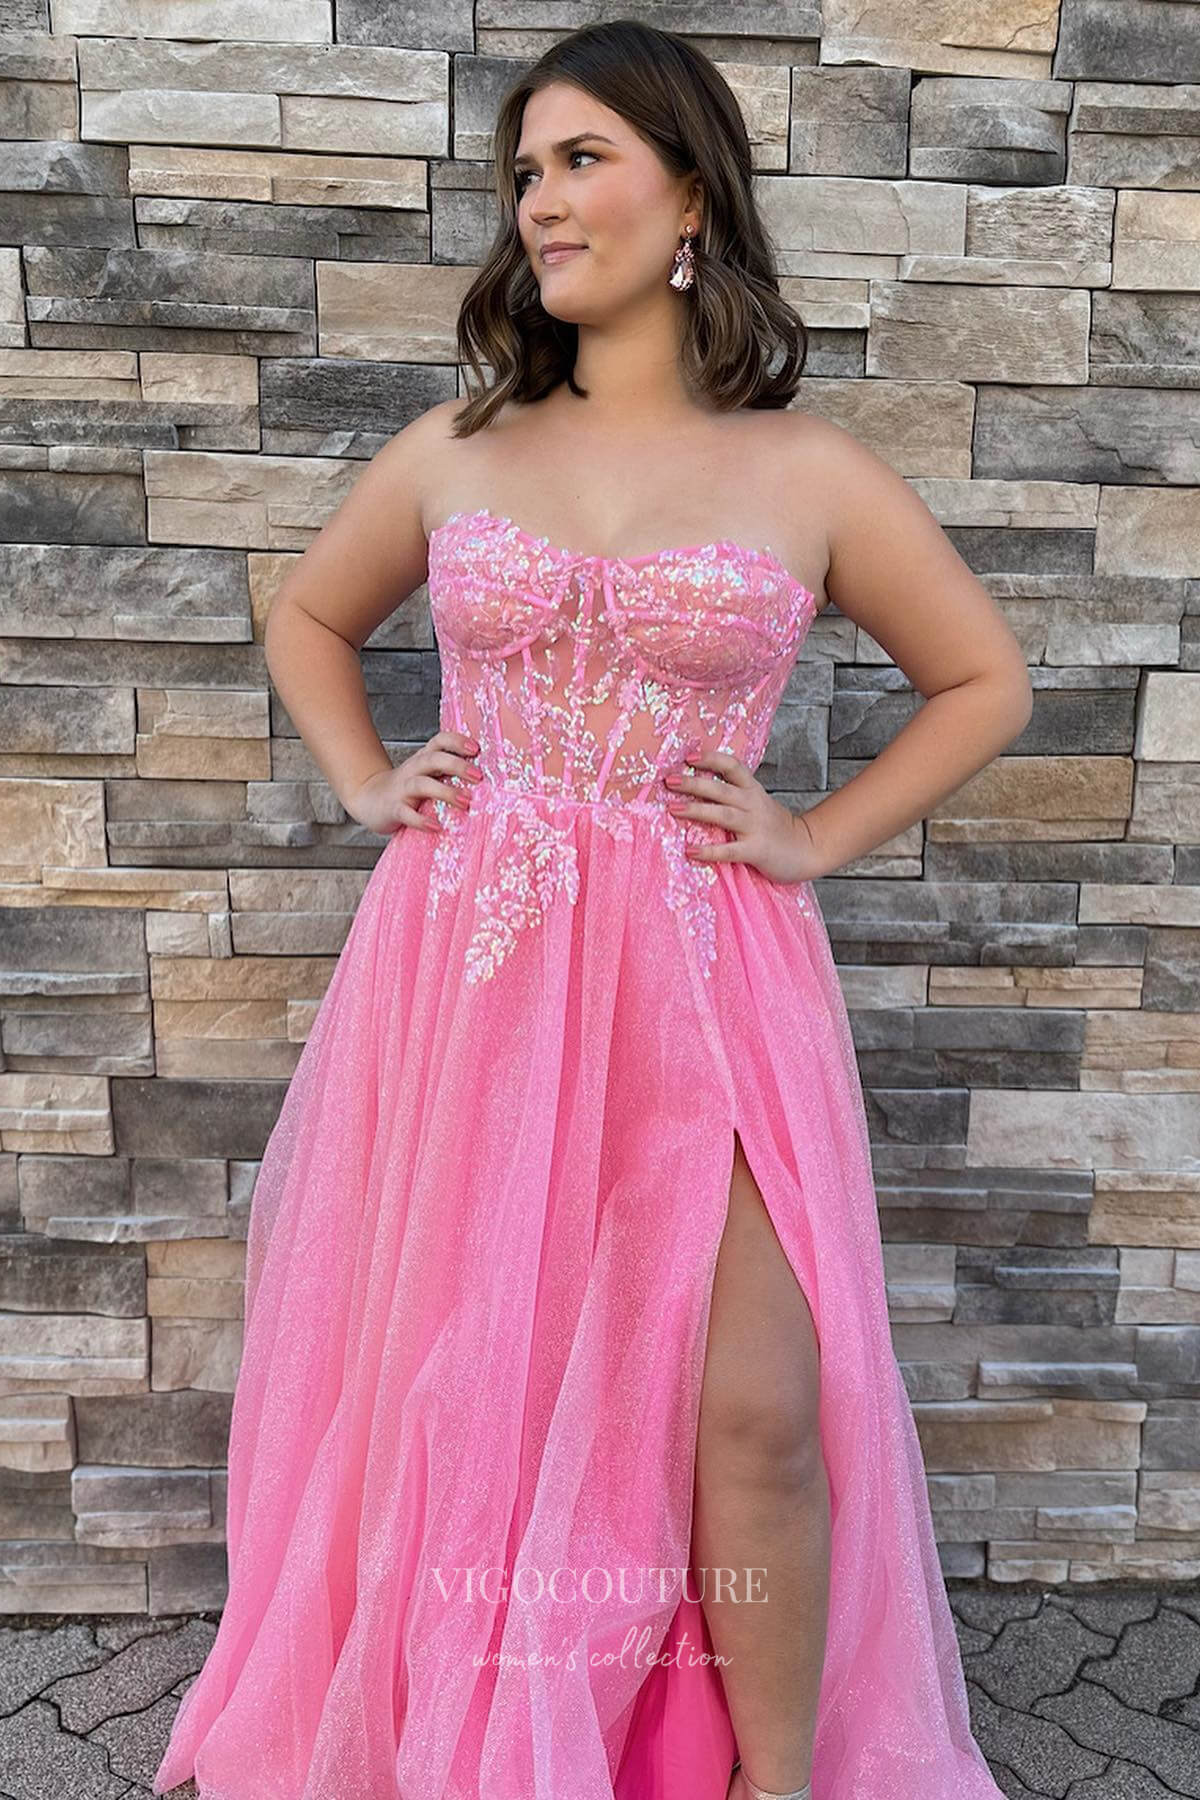 Sparkling Pink Strapless Prom Dress with Lace Applique Bodice and Slit 22194-Prom Dresses-vigocouture-Pink-Custom Size-vigocouture